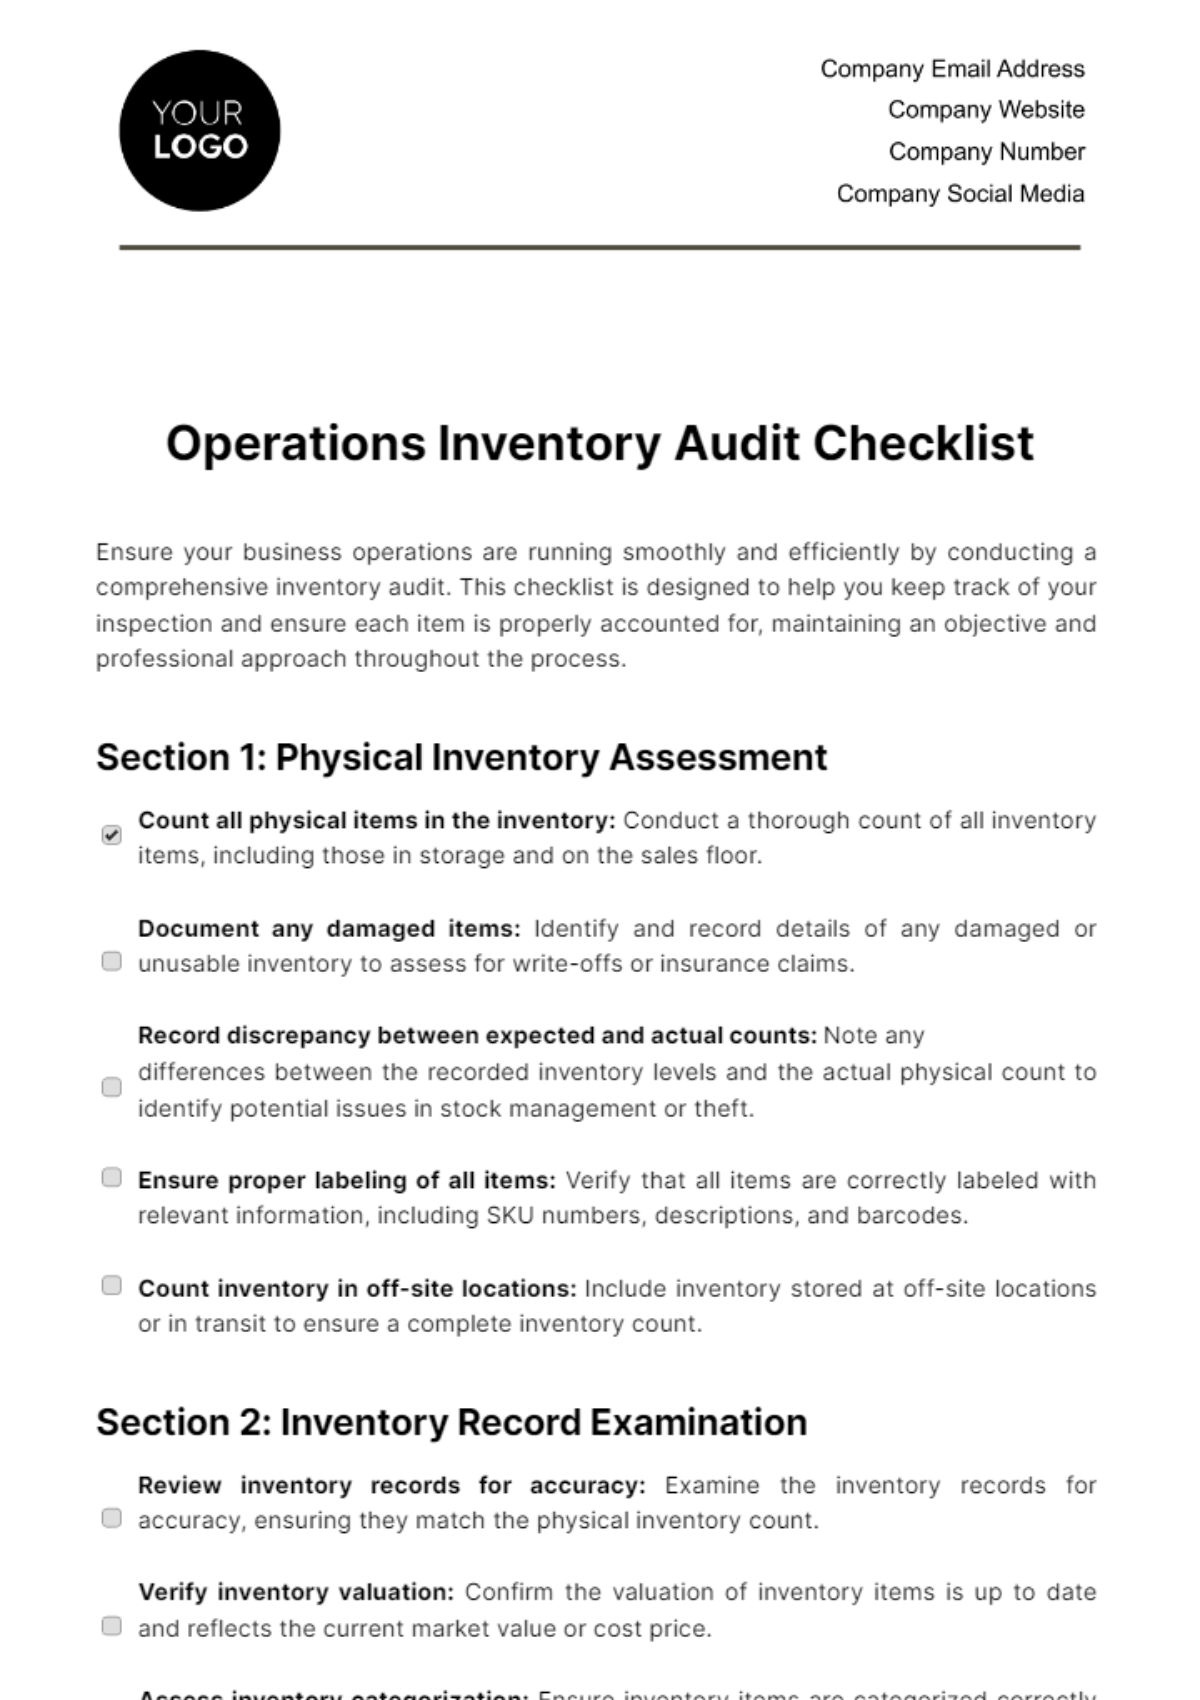 Operations Inventory Audit Checklist Template